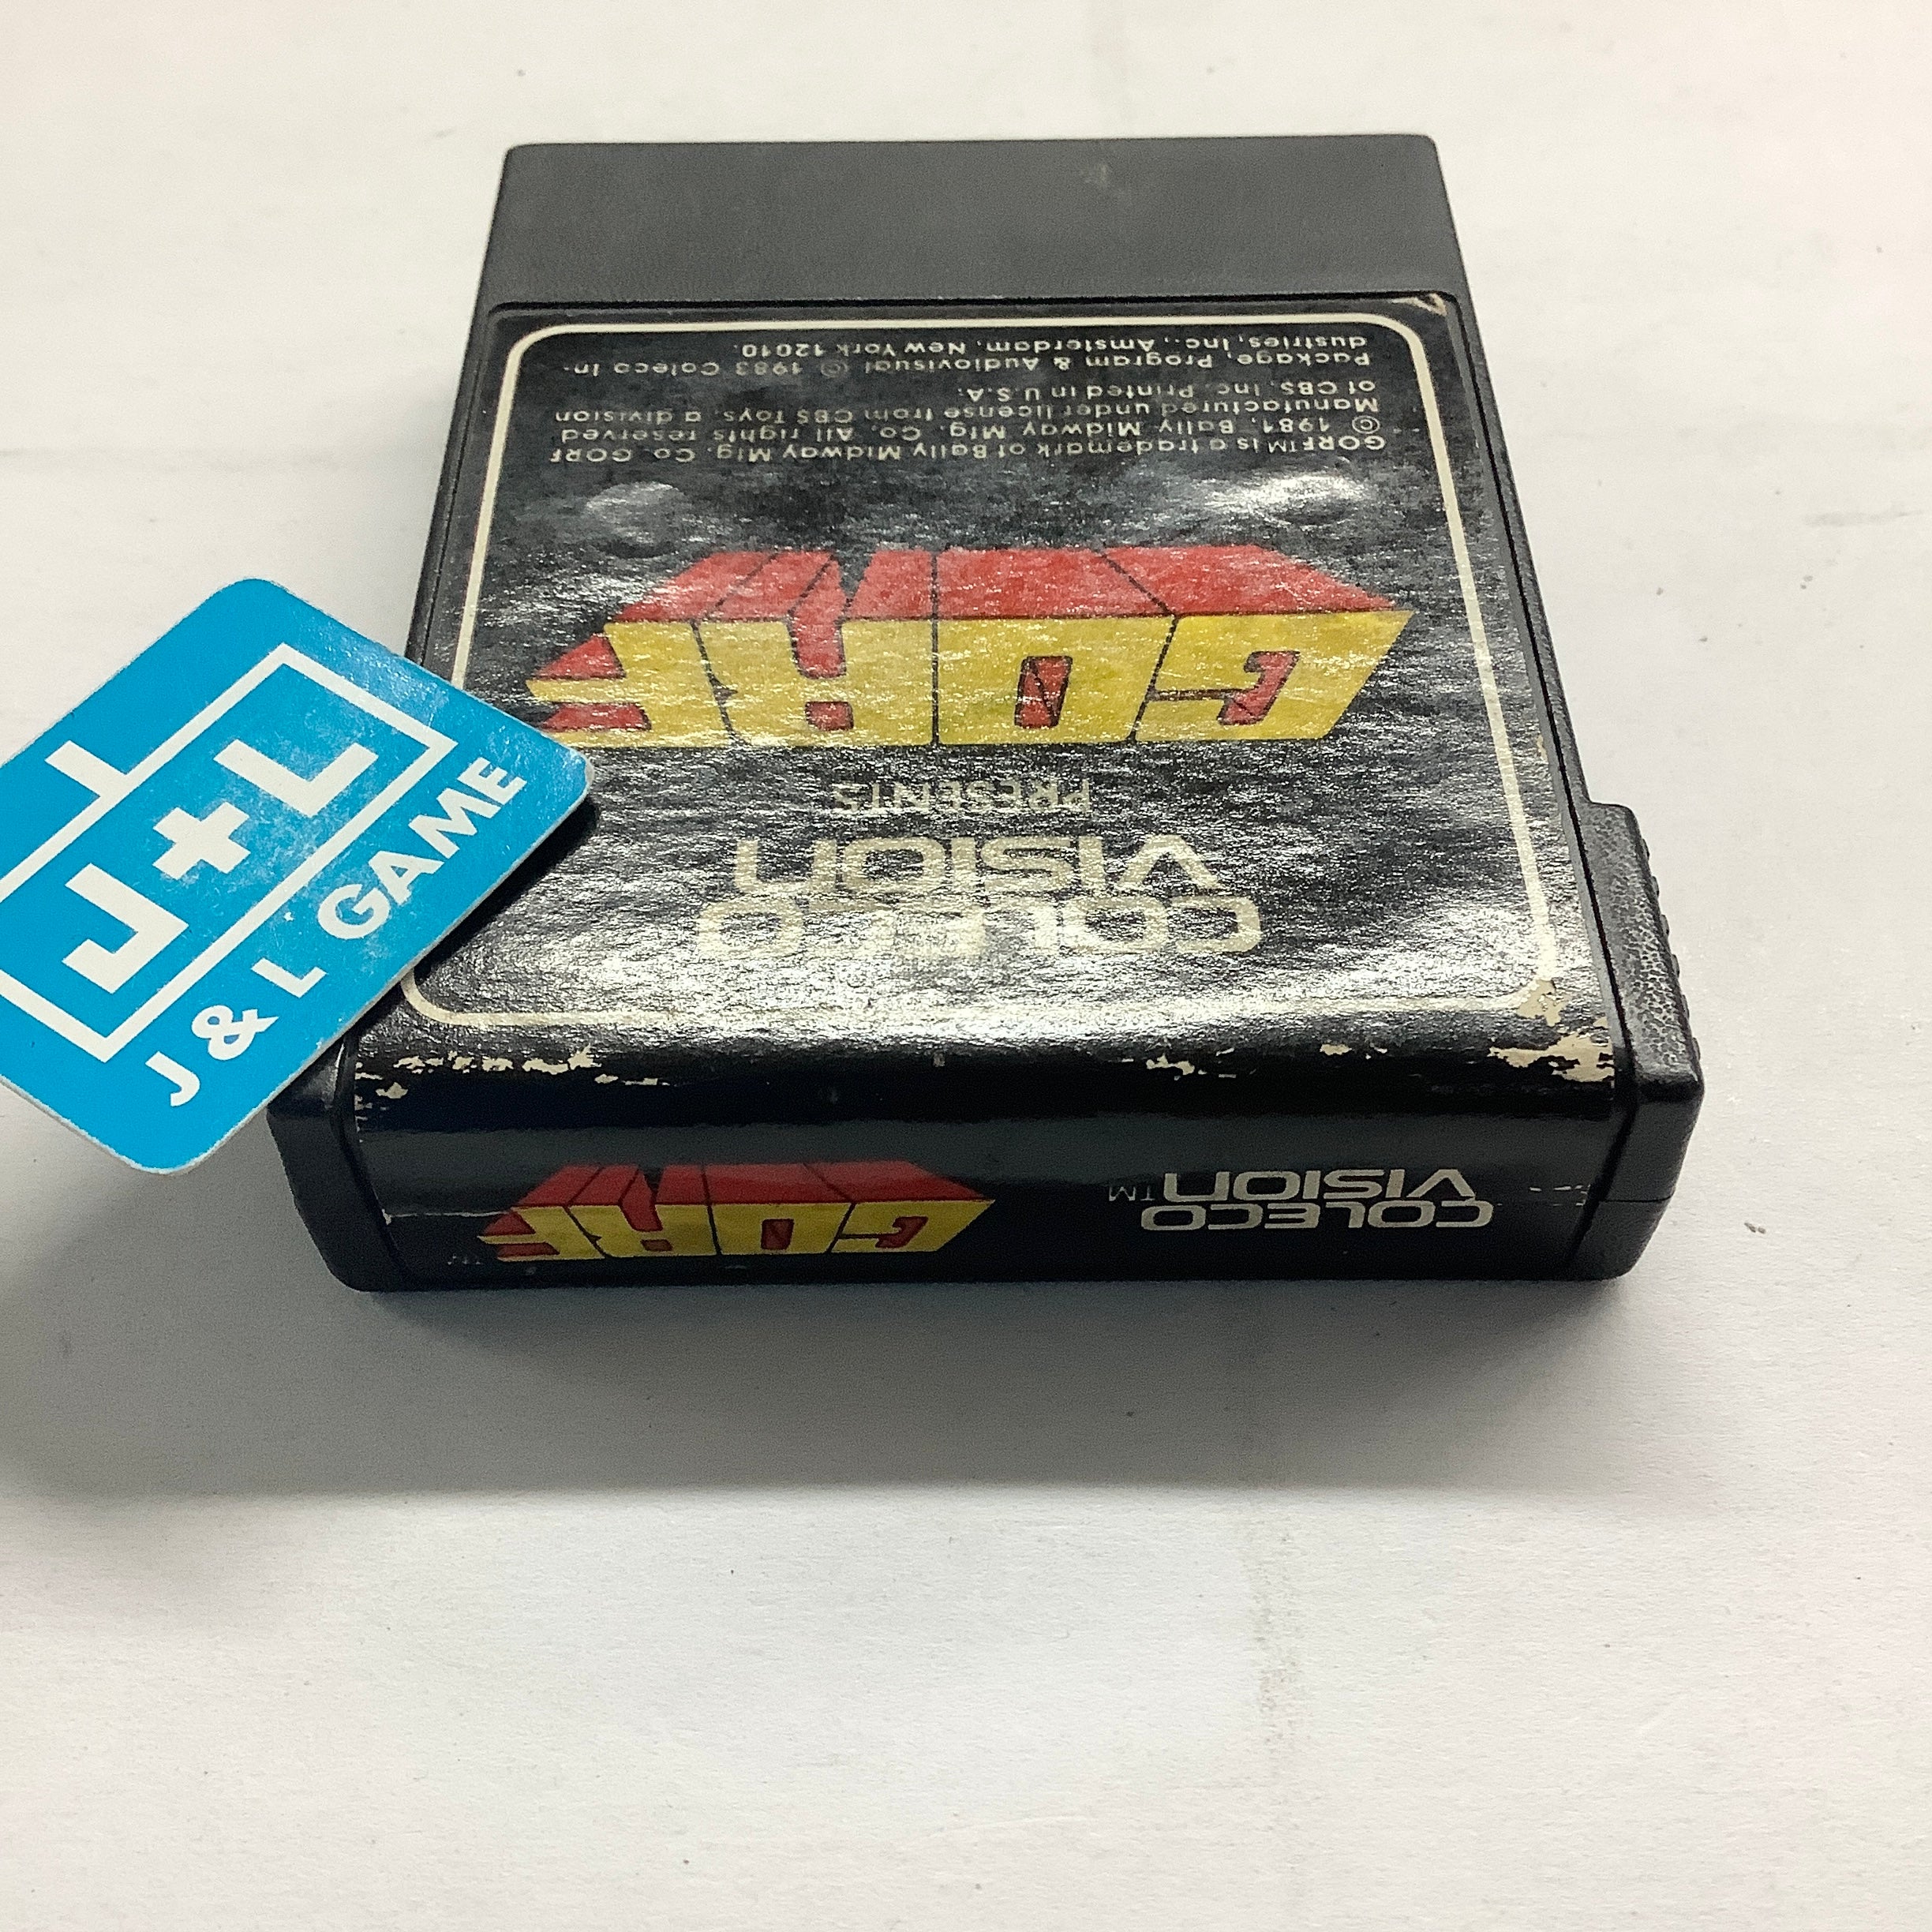 Gorf - (CVIS) Colecovision [Pre-Owned] Video Games Coleco   